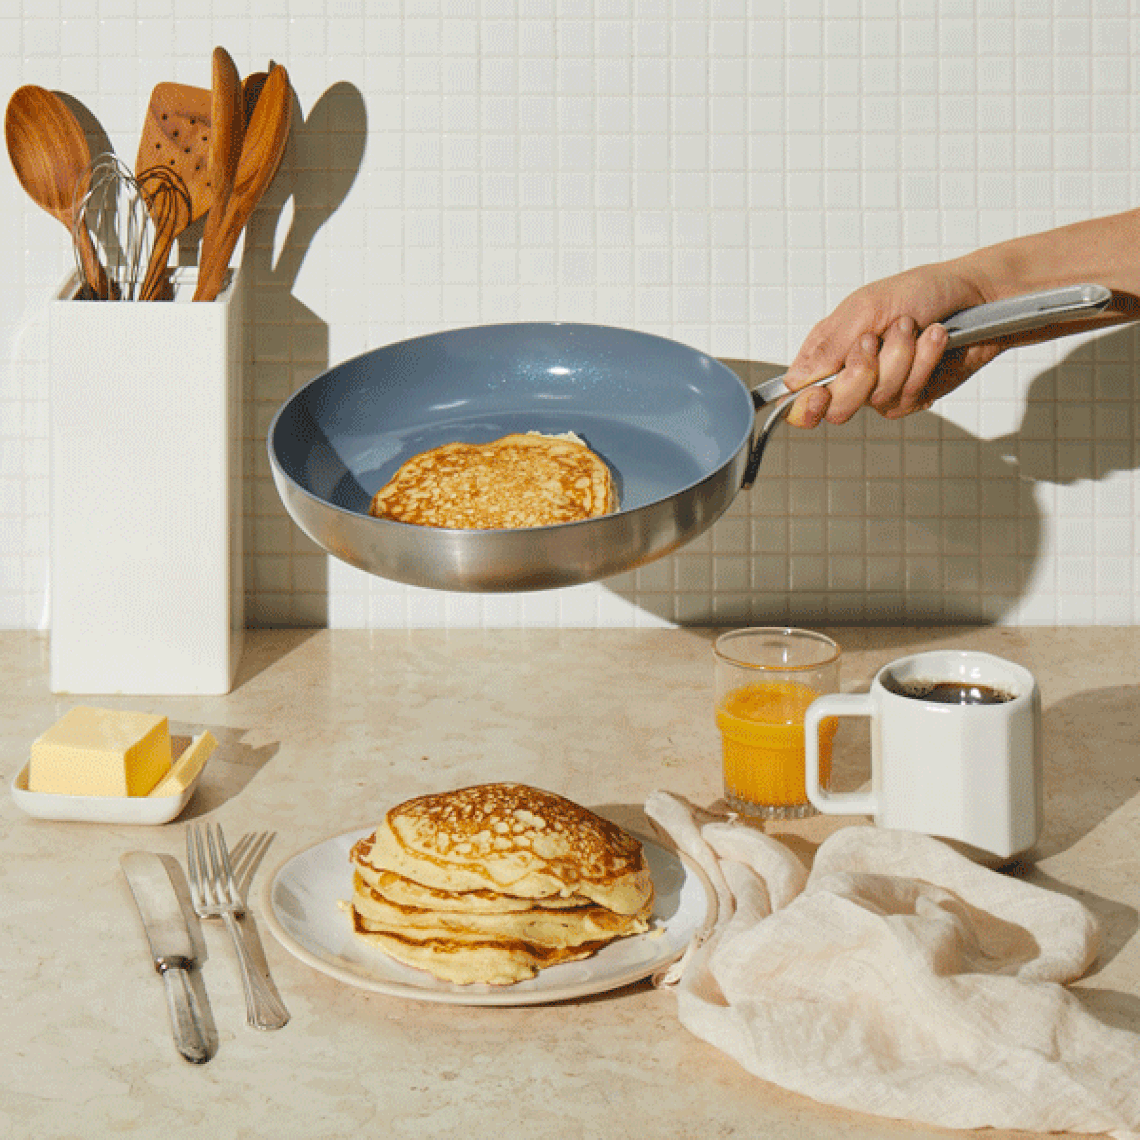 Five Two by Food52 Skillets, 2 Size Options, Tri-Ply Stainless Steel with  Pan Protectors, Nonstick on Food52